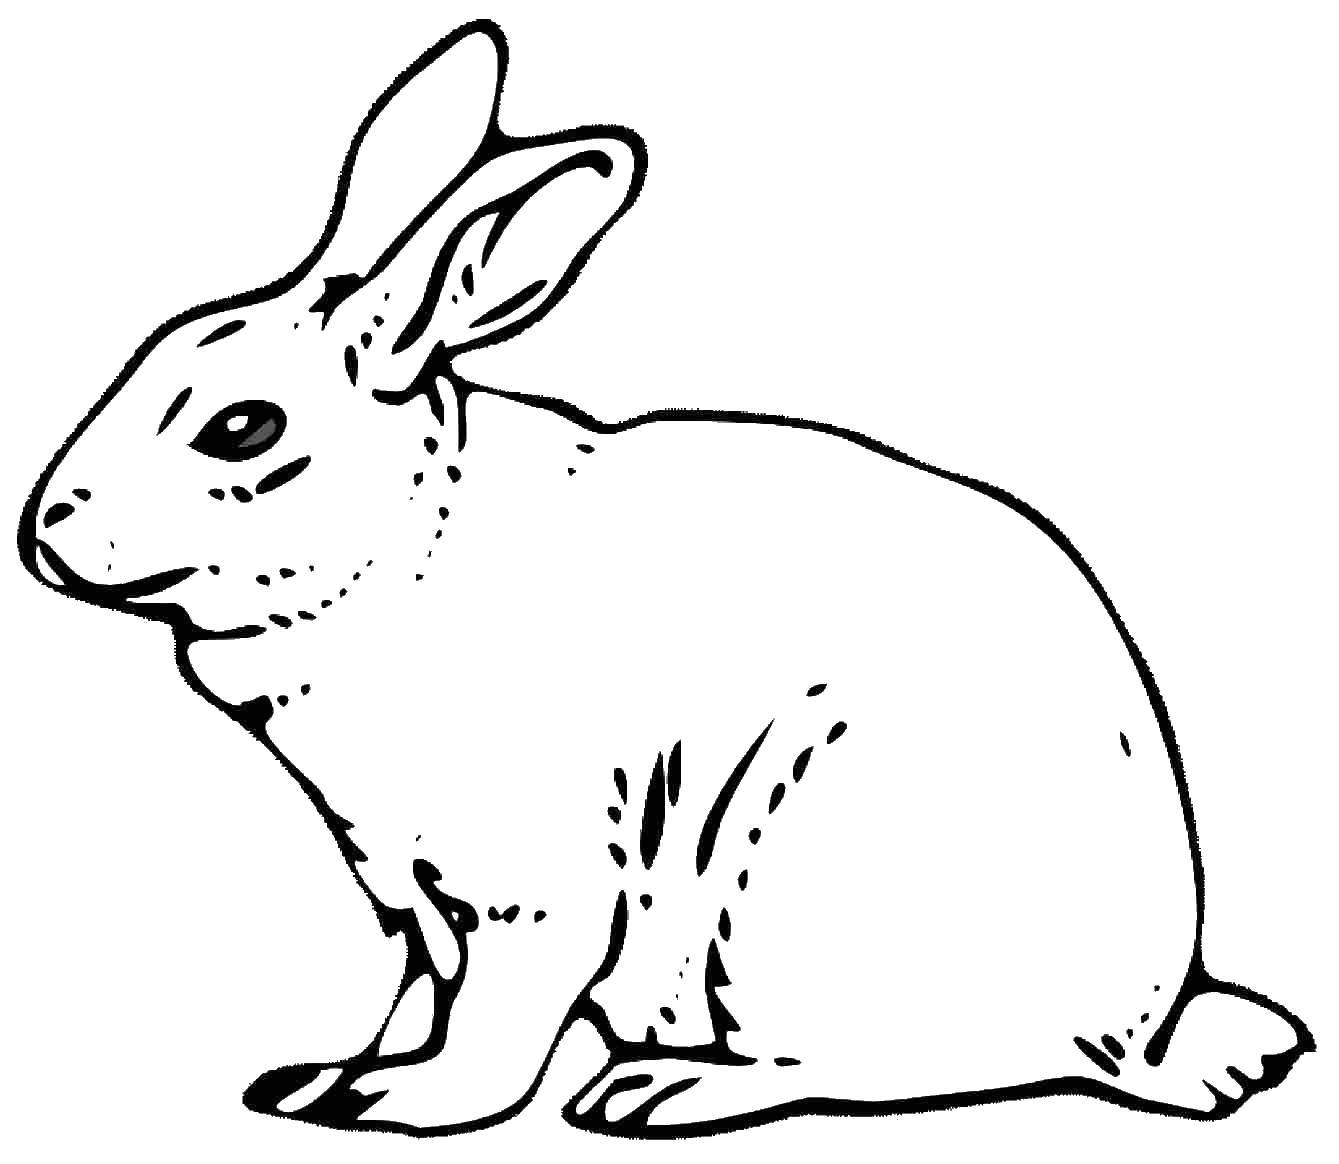 Coloring Rabbit. Category the rabbit. Tags:  Animals, Bunny.